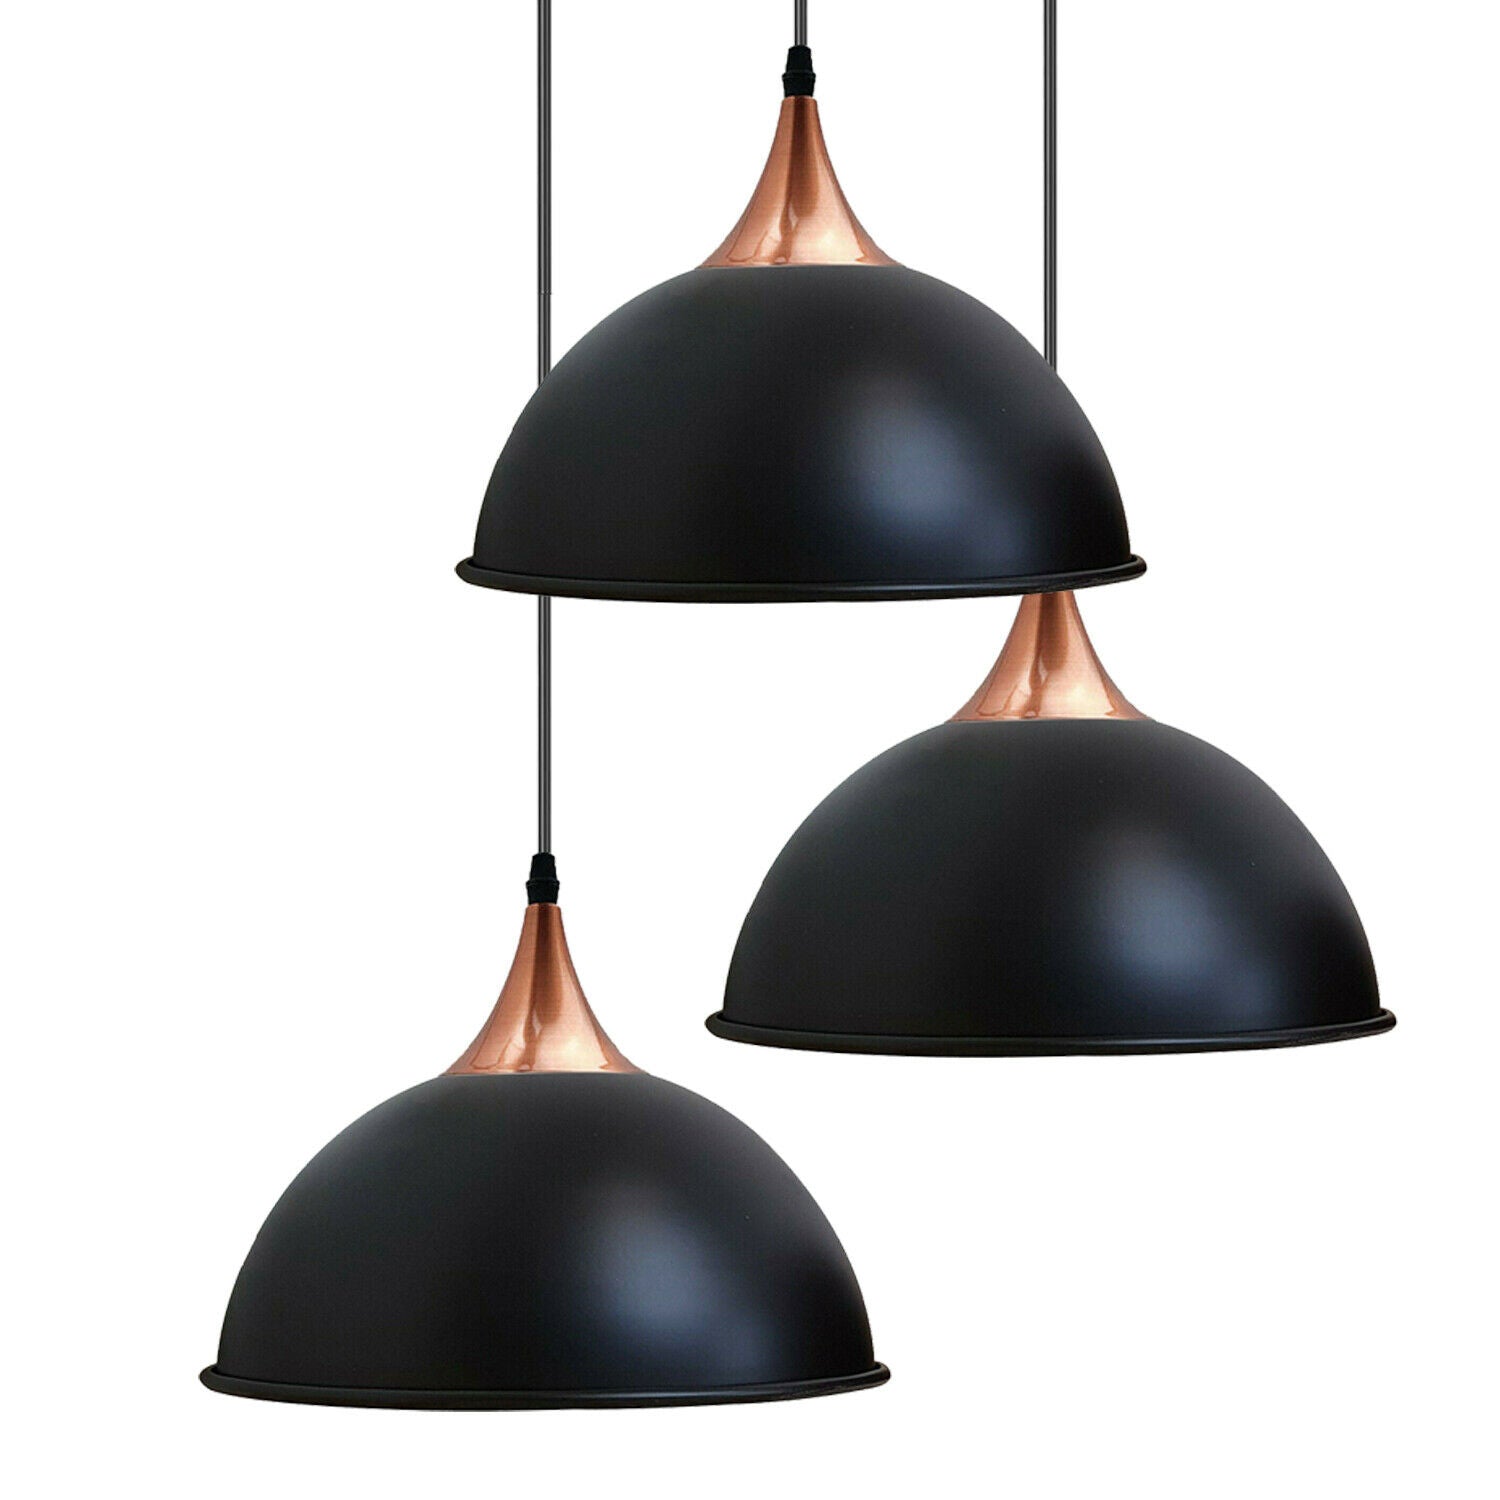 Black 3 Way Industrial Iron Curved Dome Pendant Lamp Shade